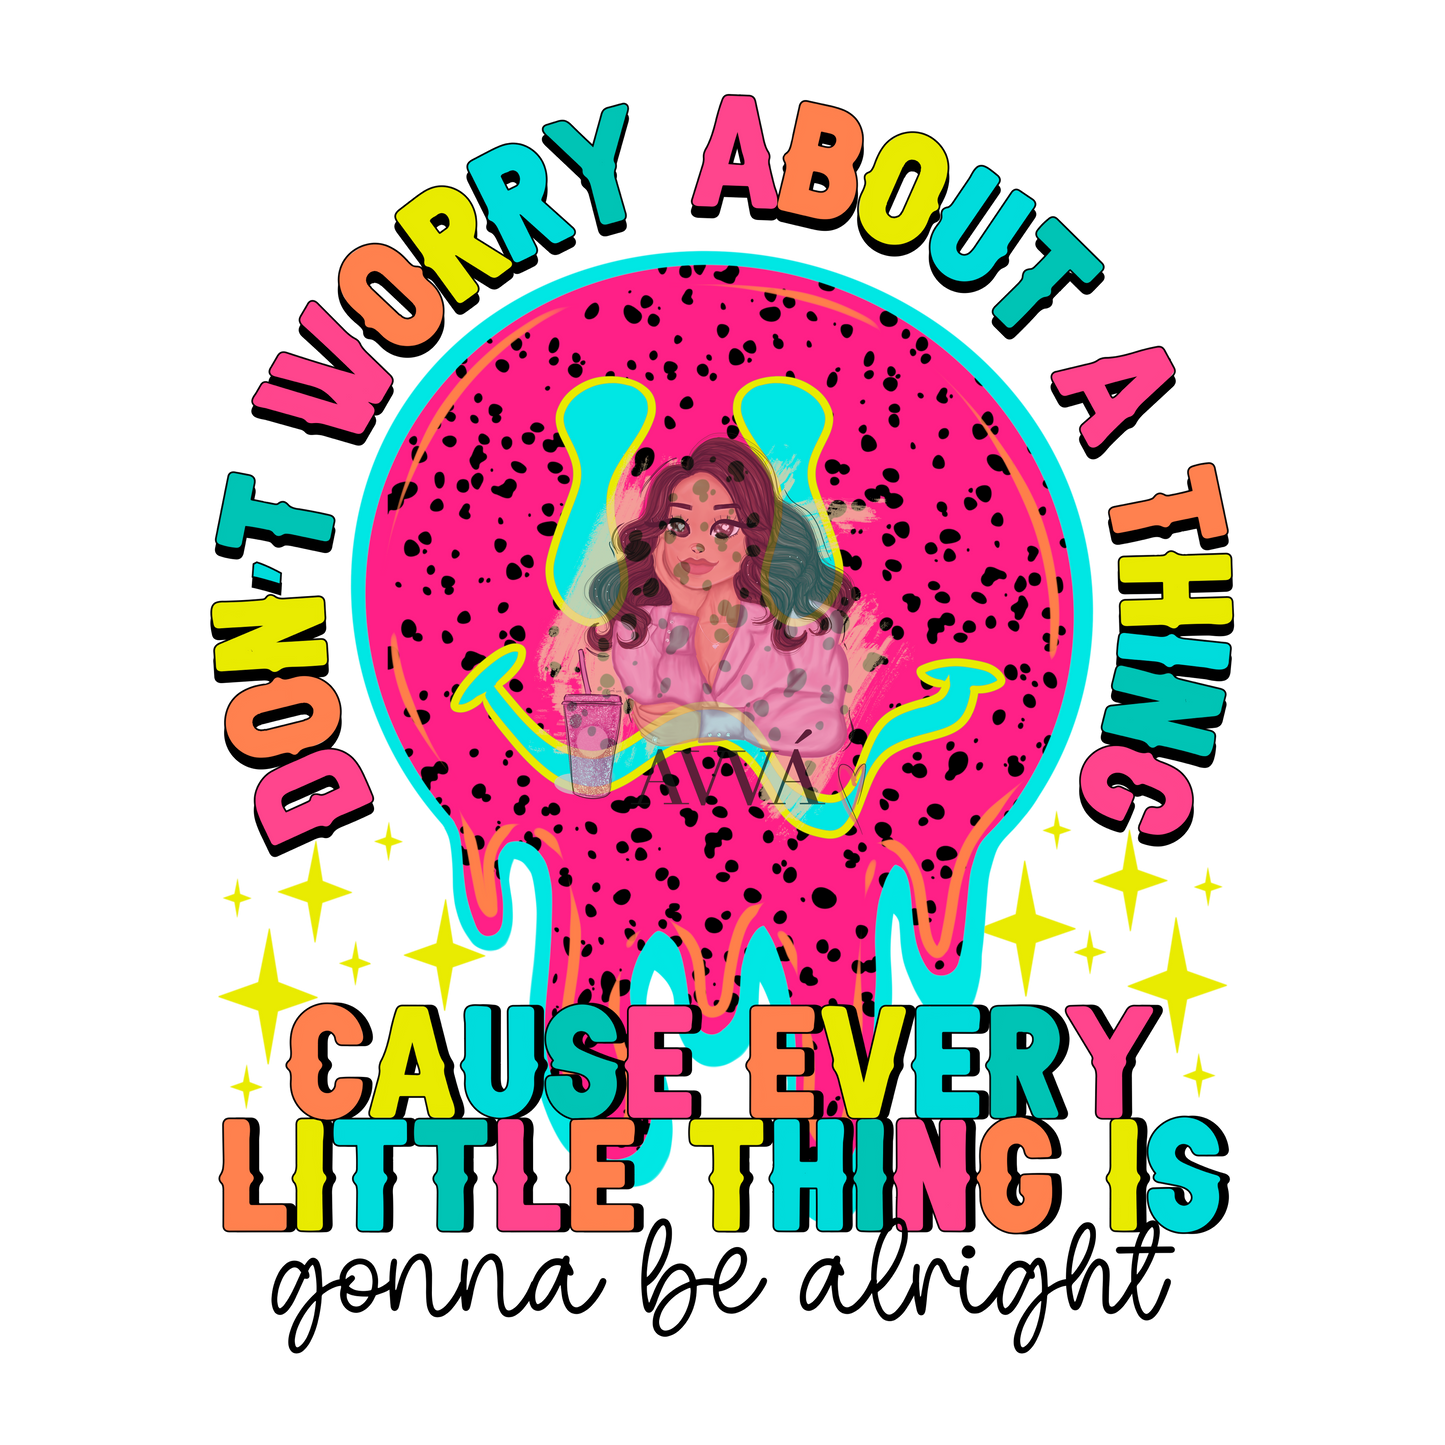 Worry Bout a Thing Vinyl + Decal Set